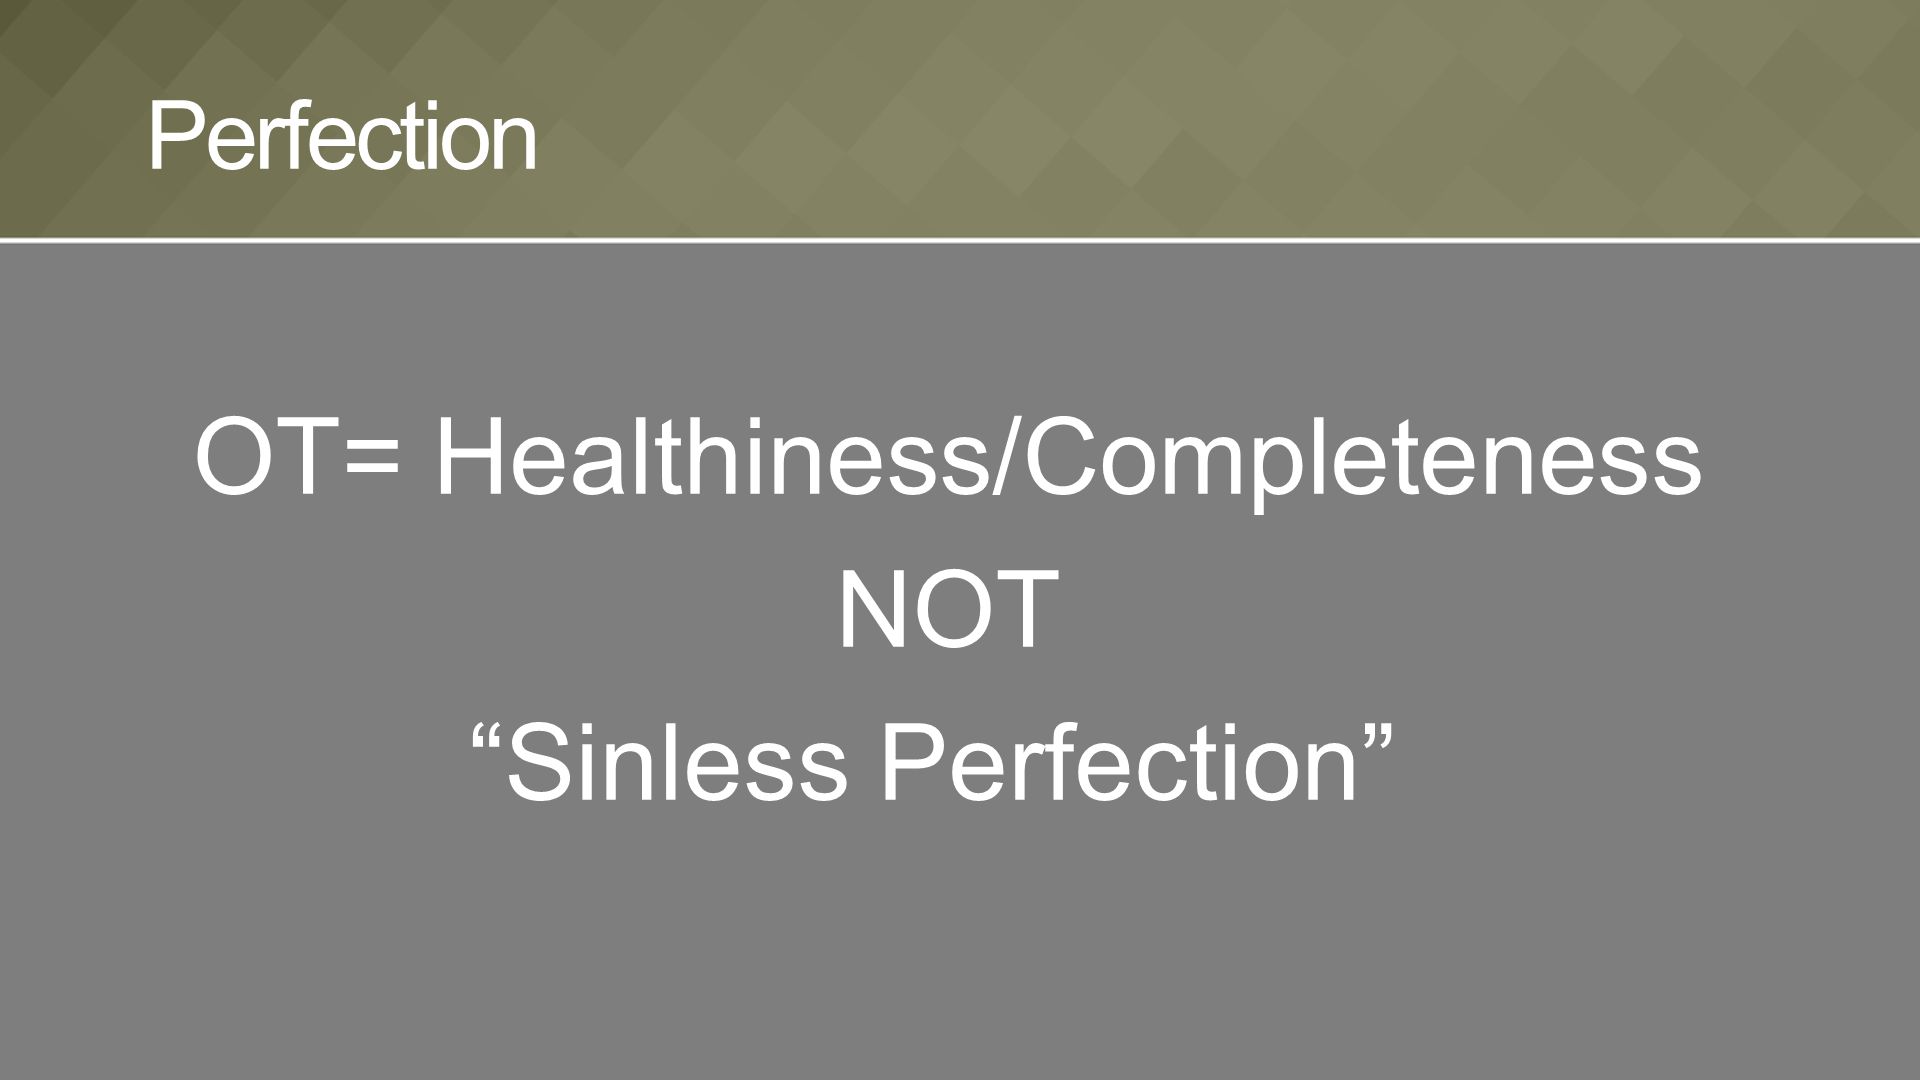 OT= Healthiness/Completeness NOT Sinless Perfection Perfection